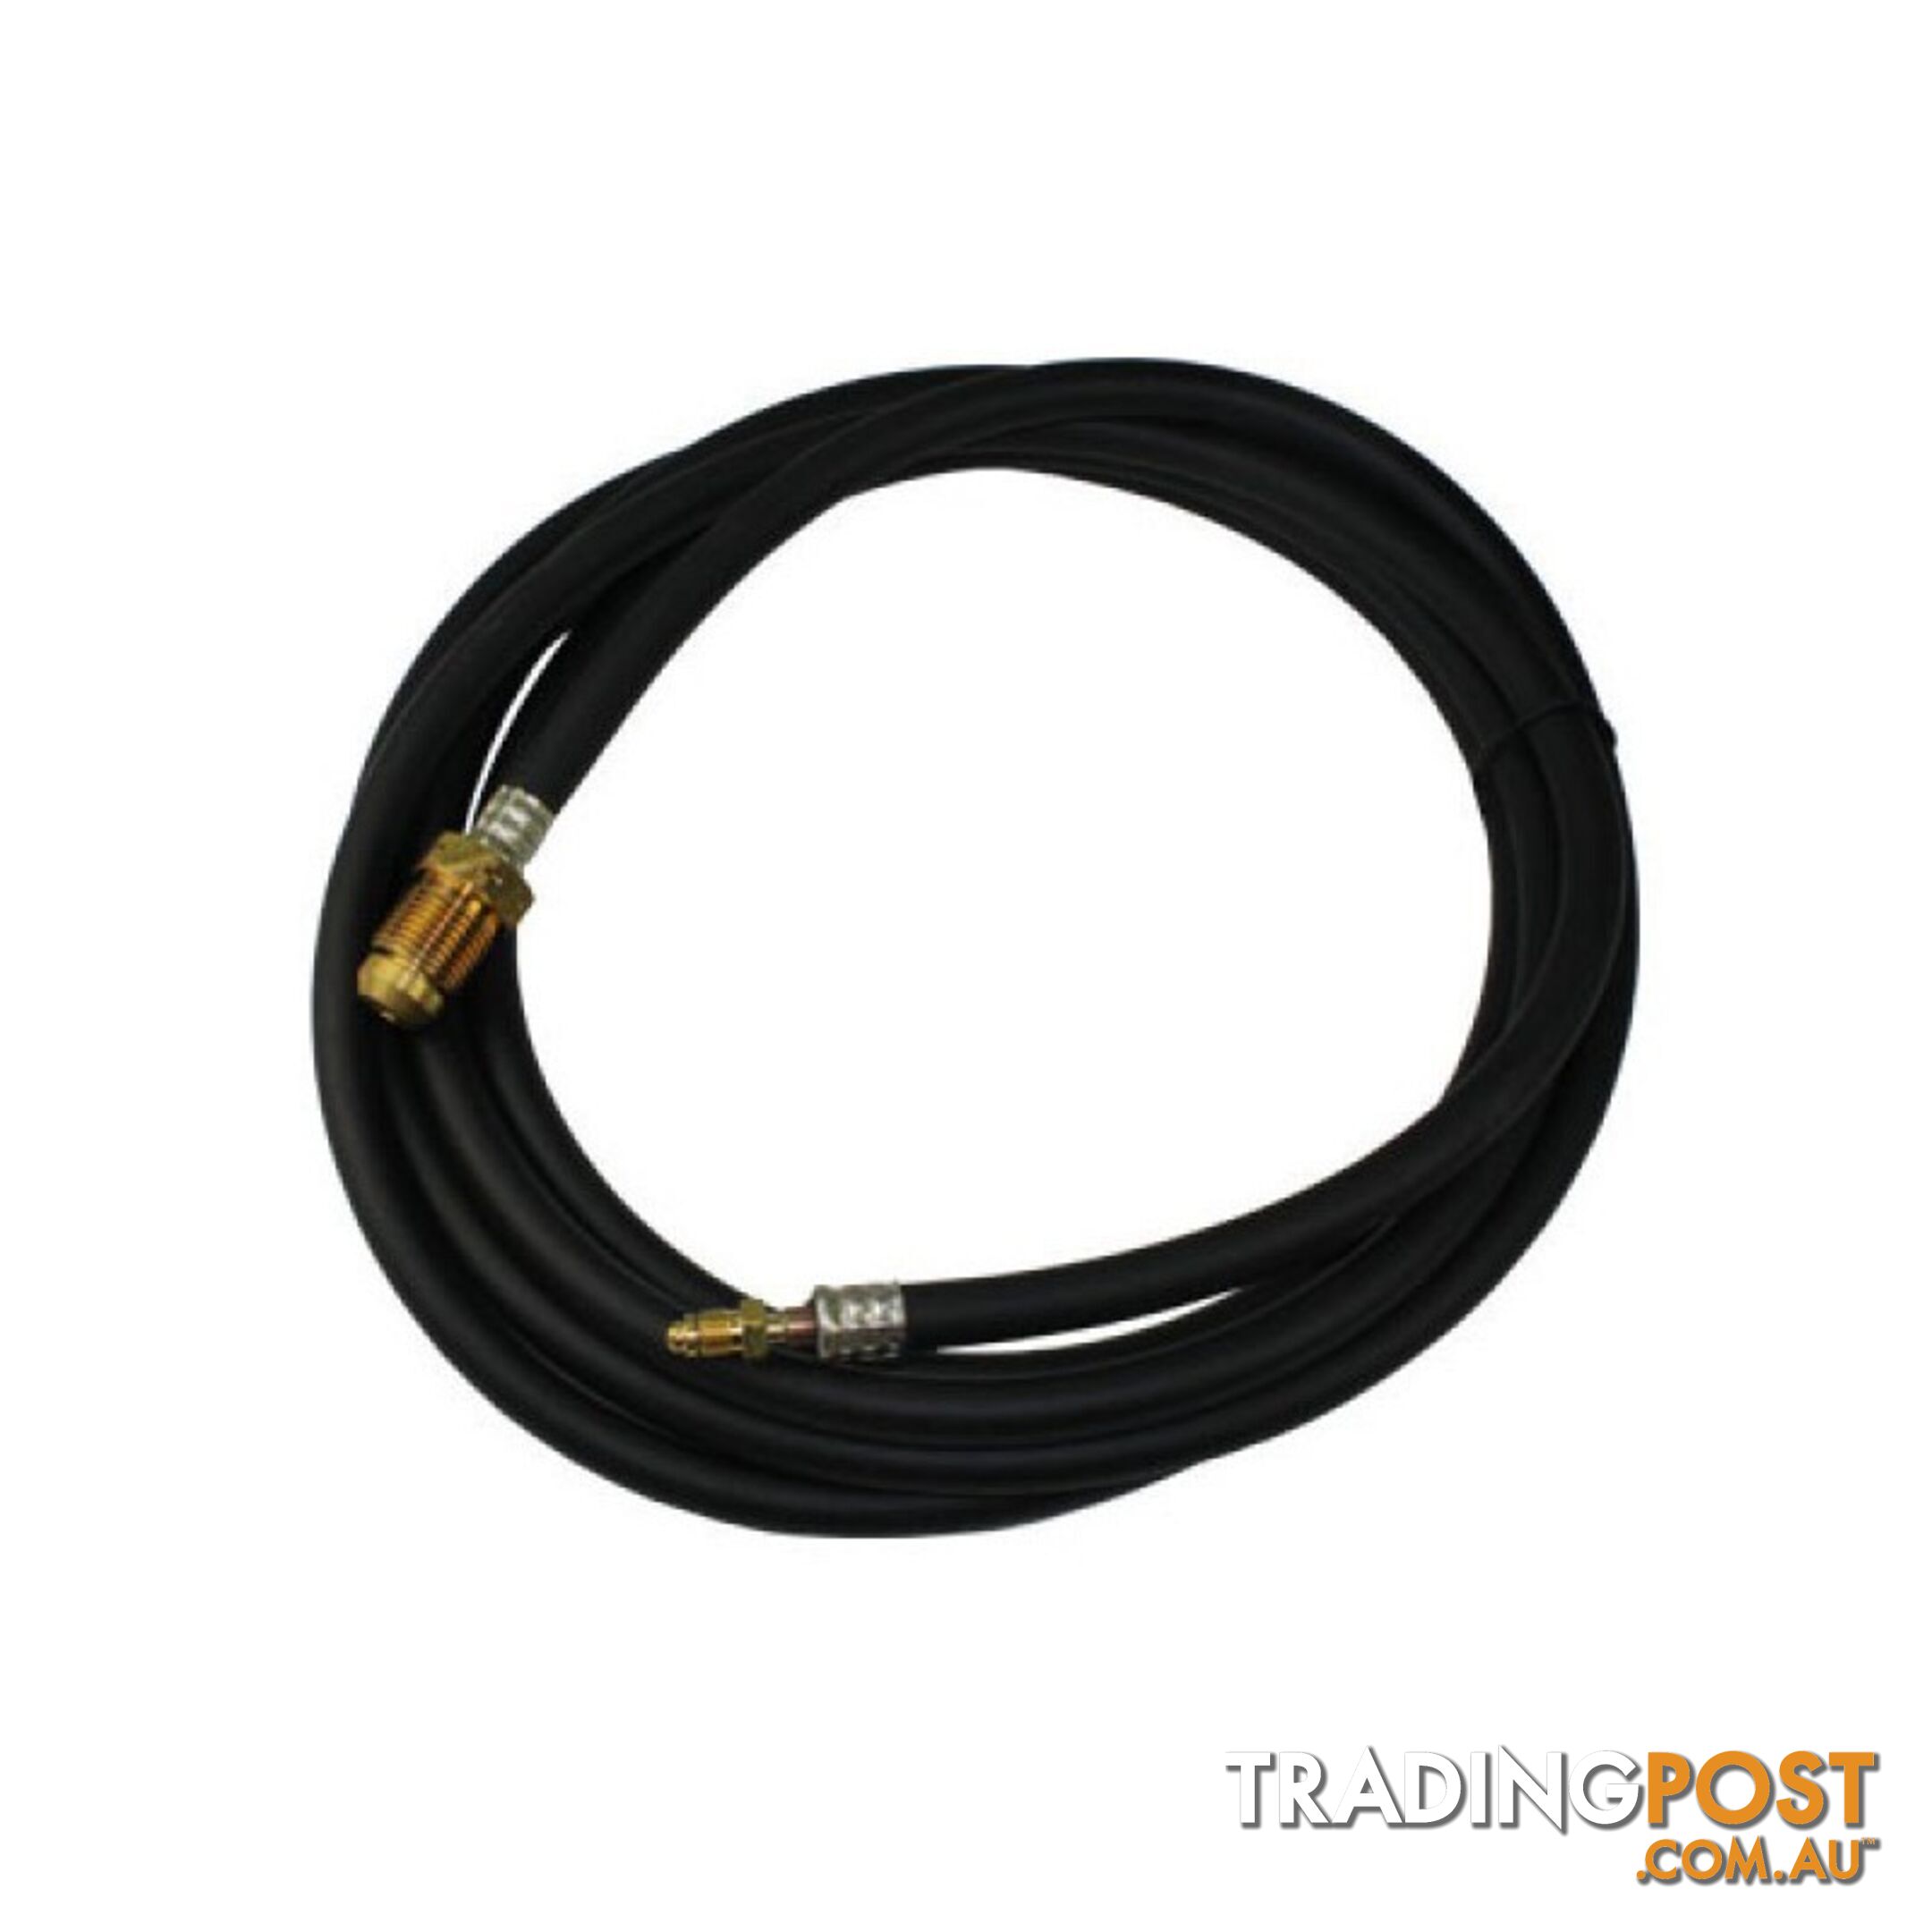 1 pce 8mt Rubber Power Cable Suits 18 series